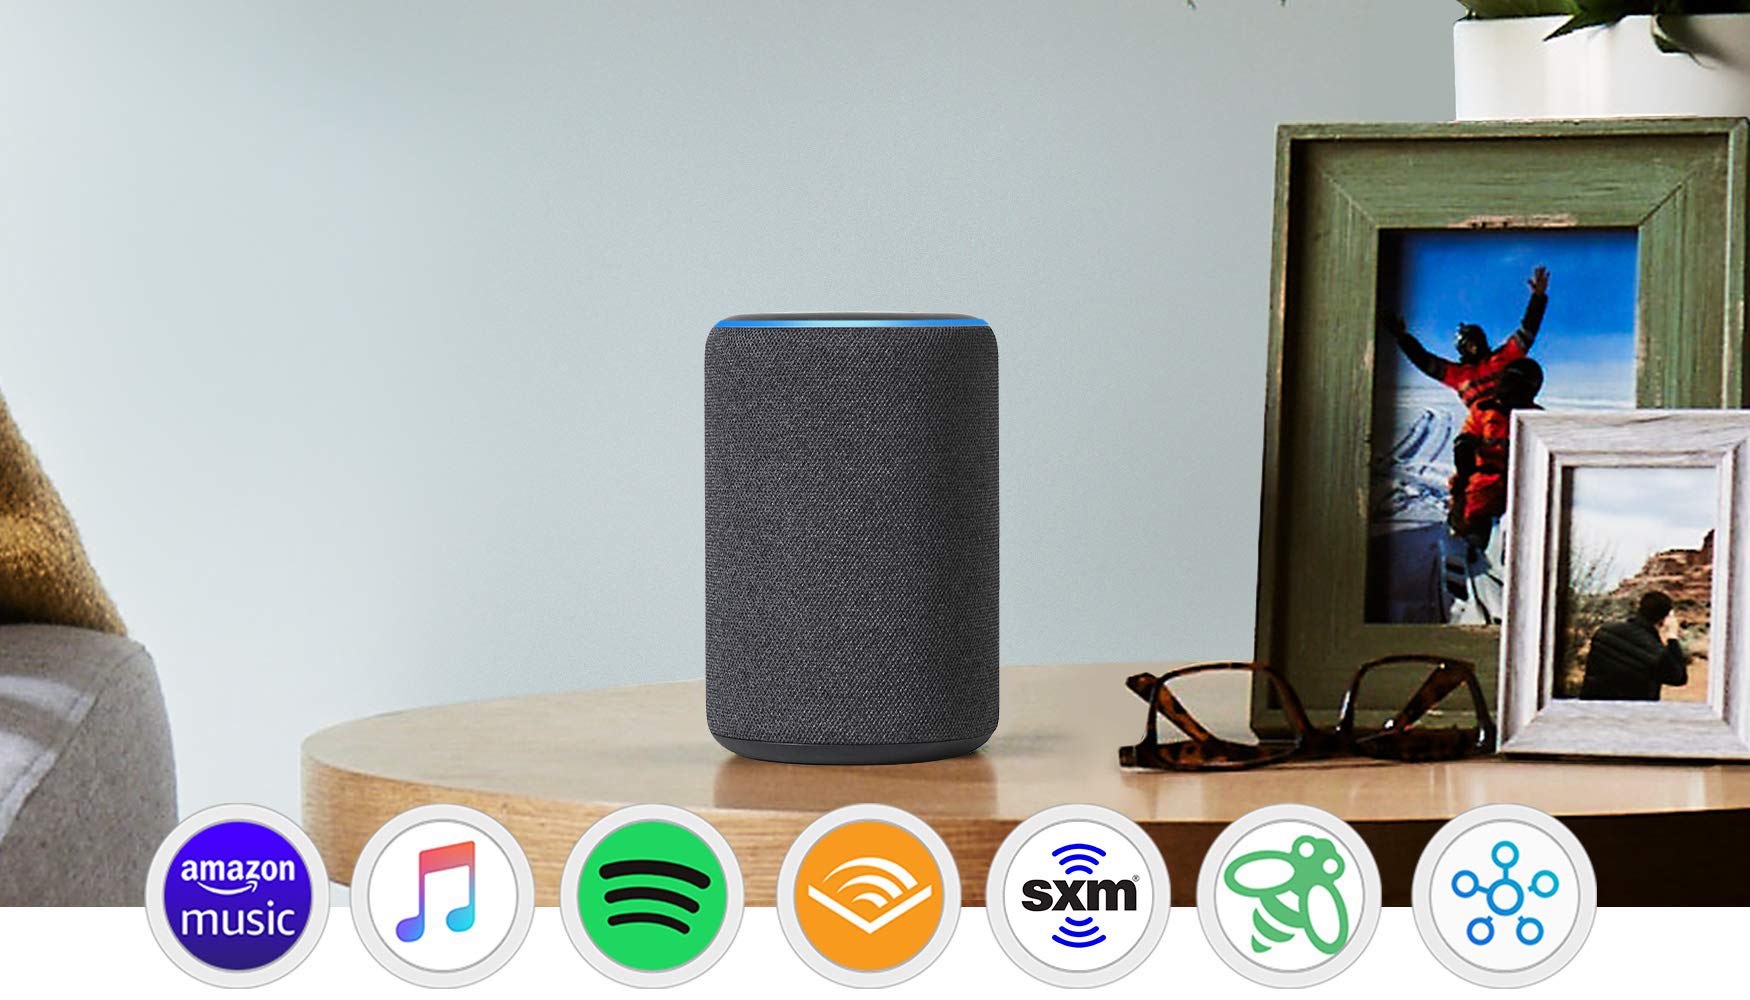 Echo Plus (2nd Gen) - Premium sound with built-in smart home hub - Charcoal